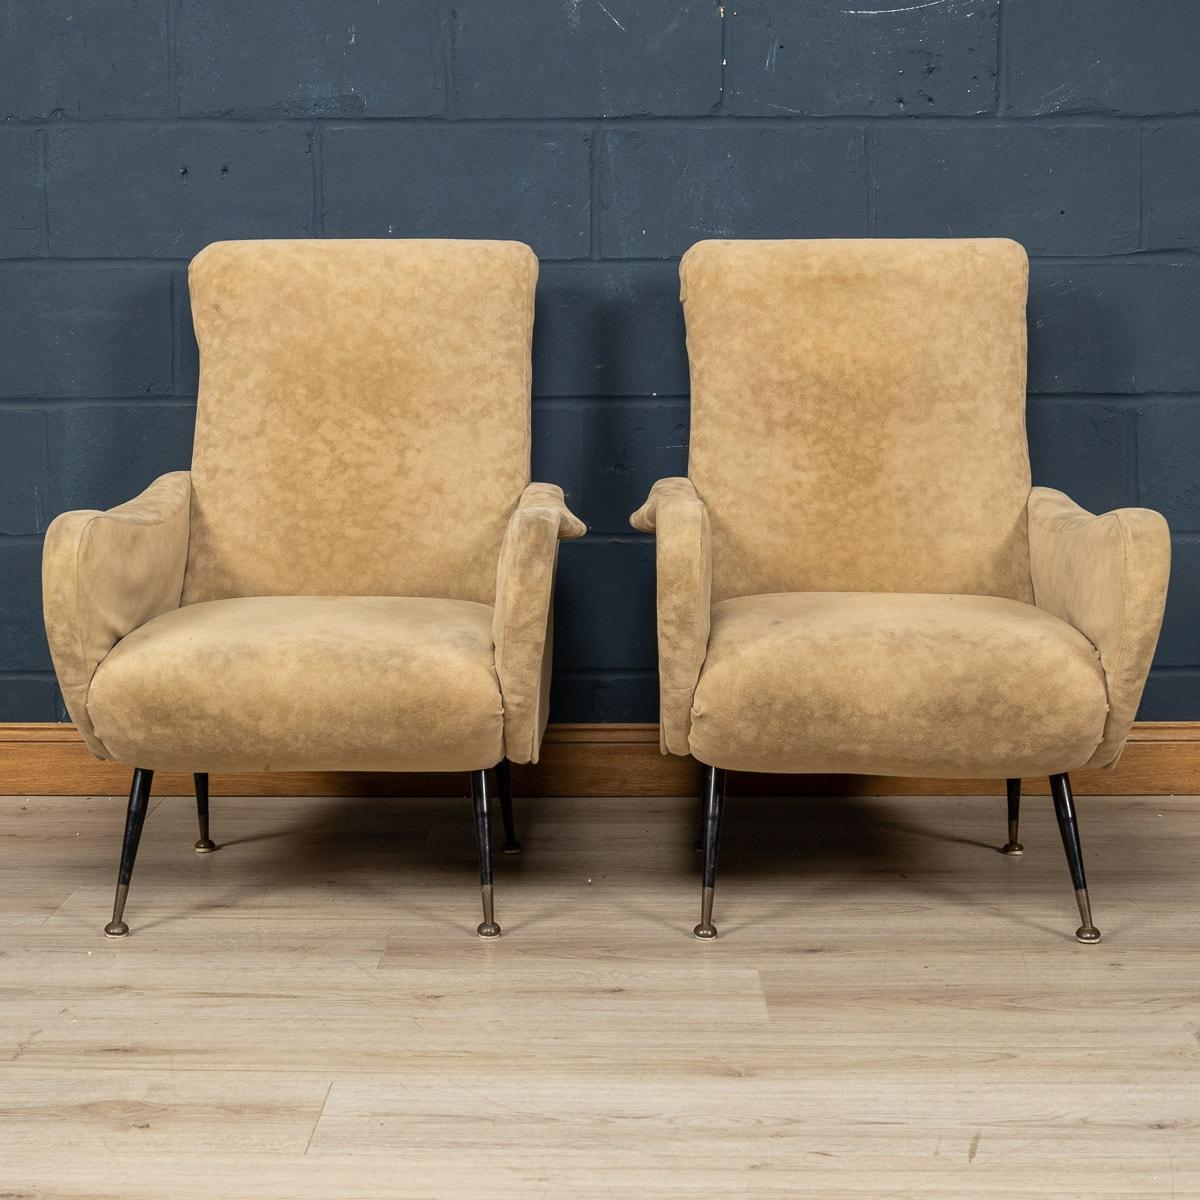 A lovely pair of armchairs made in Italy in the middle part of the 20th century. These armchairs have been upholstered in a sumptuous beige chamois leather, the striking mid century design with needle legs fitting so well in any modern or vintage